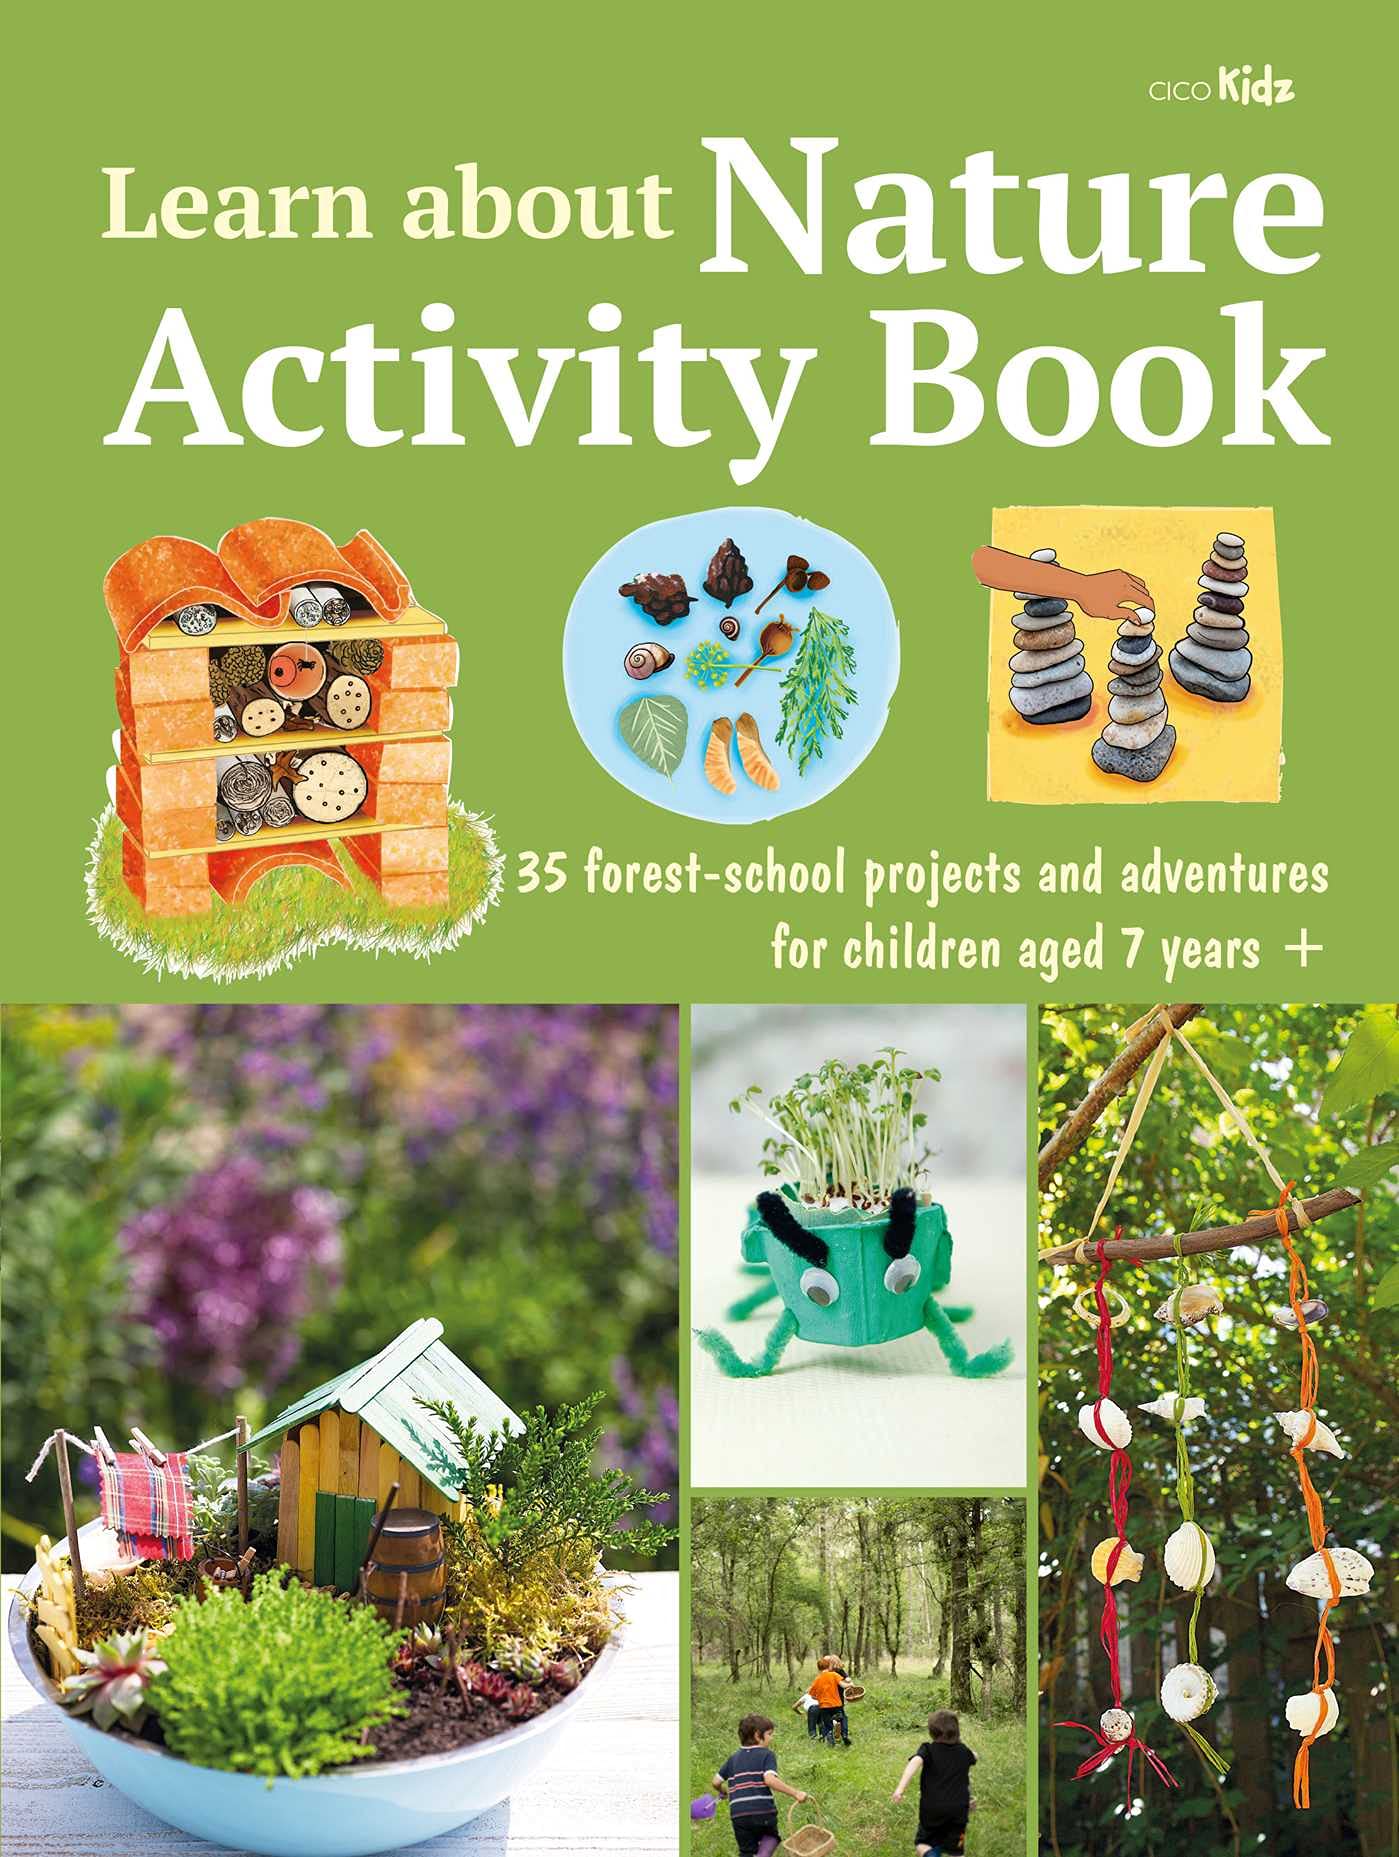 Learn about Nature - Activity Book